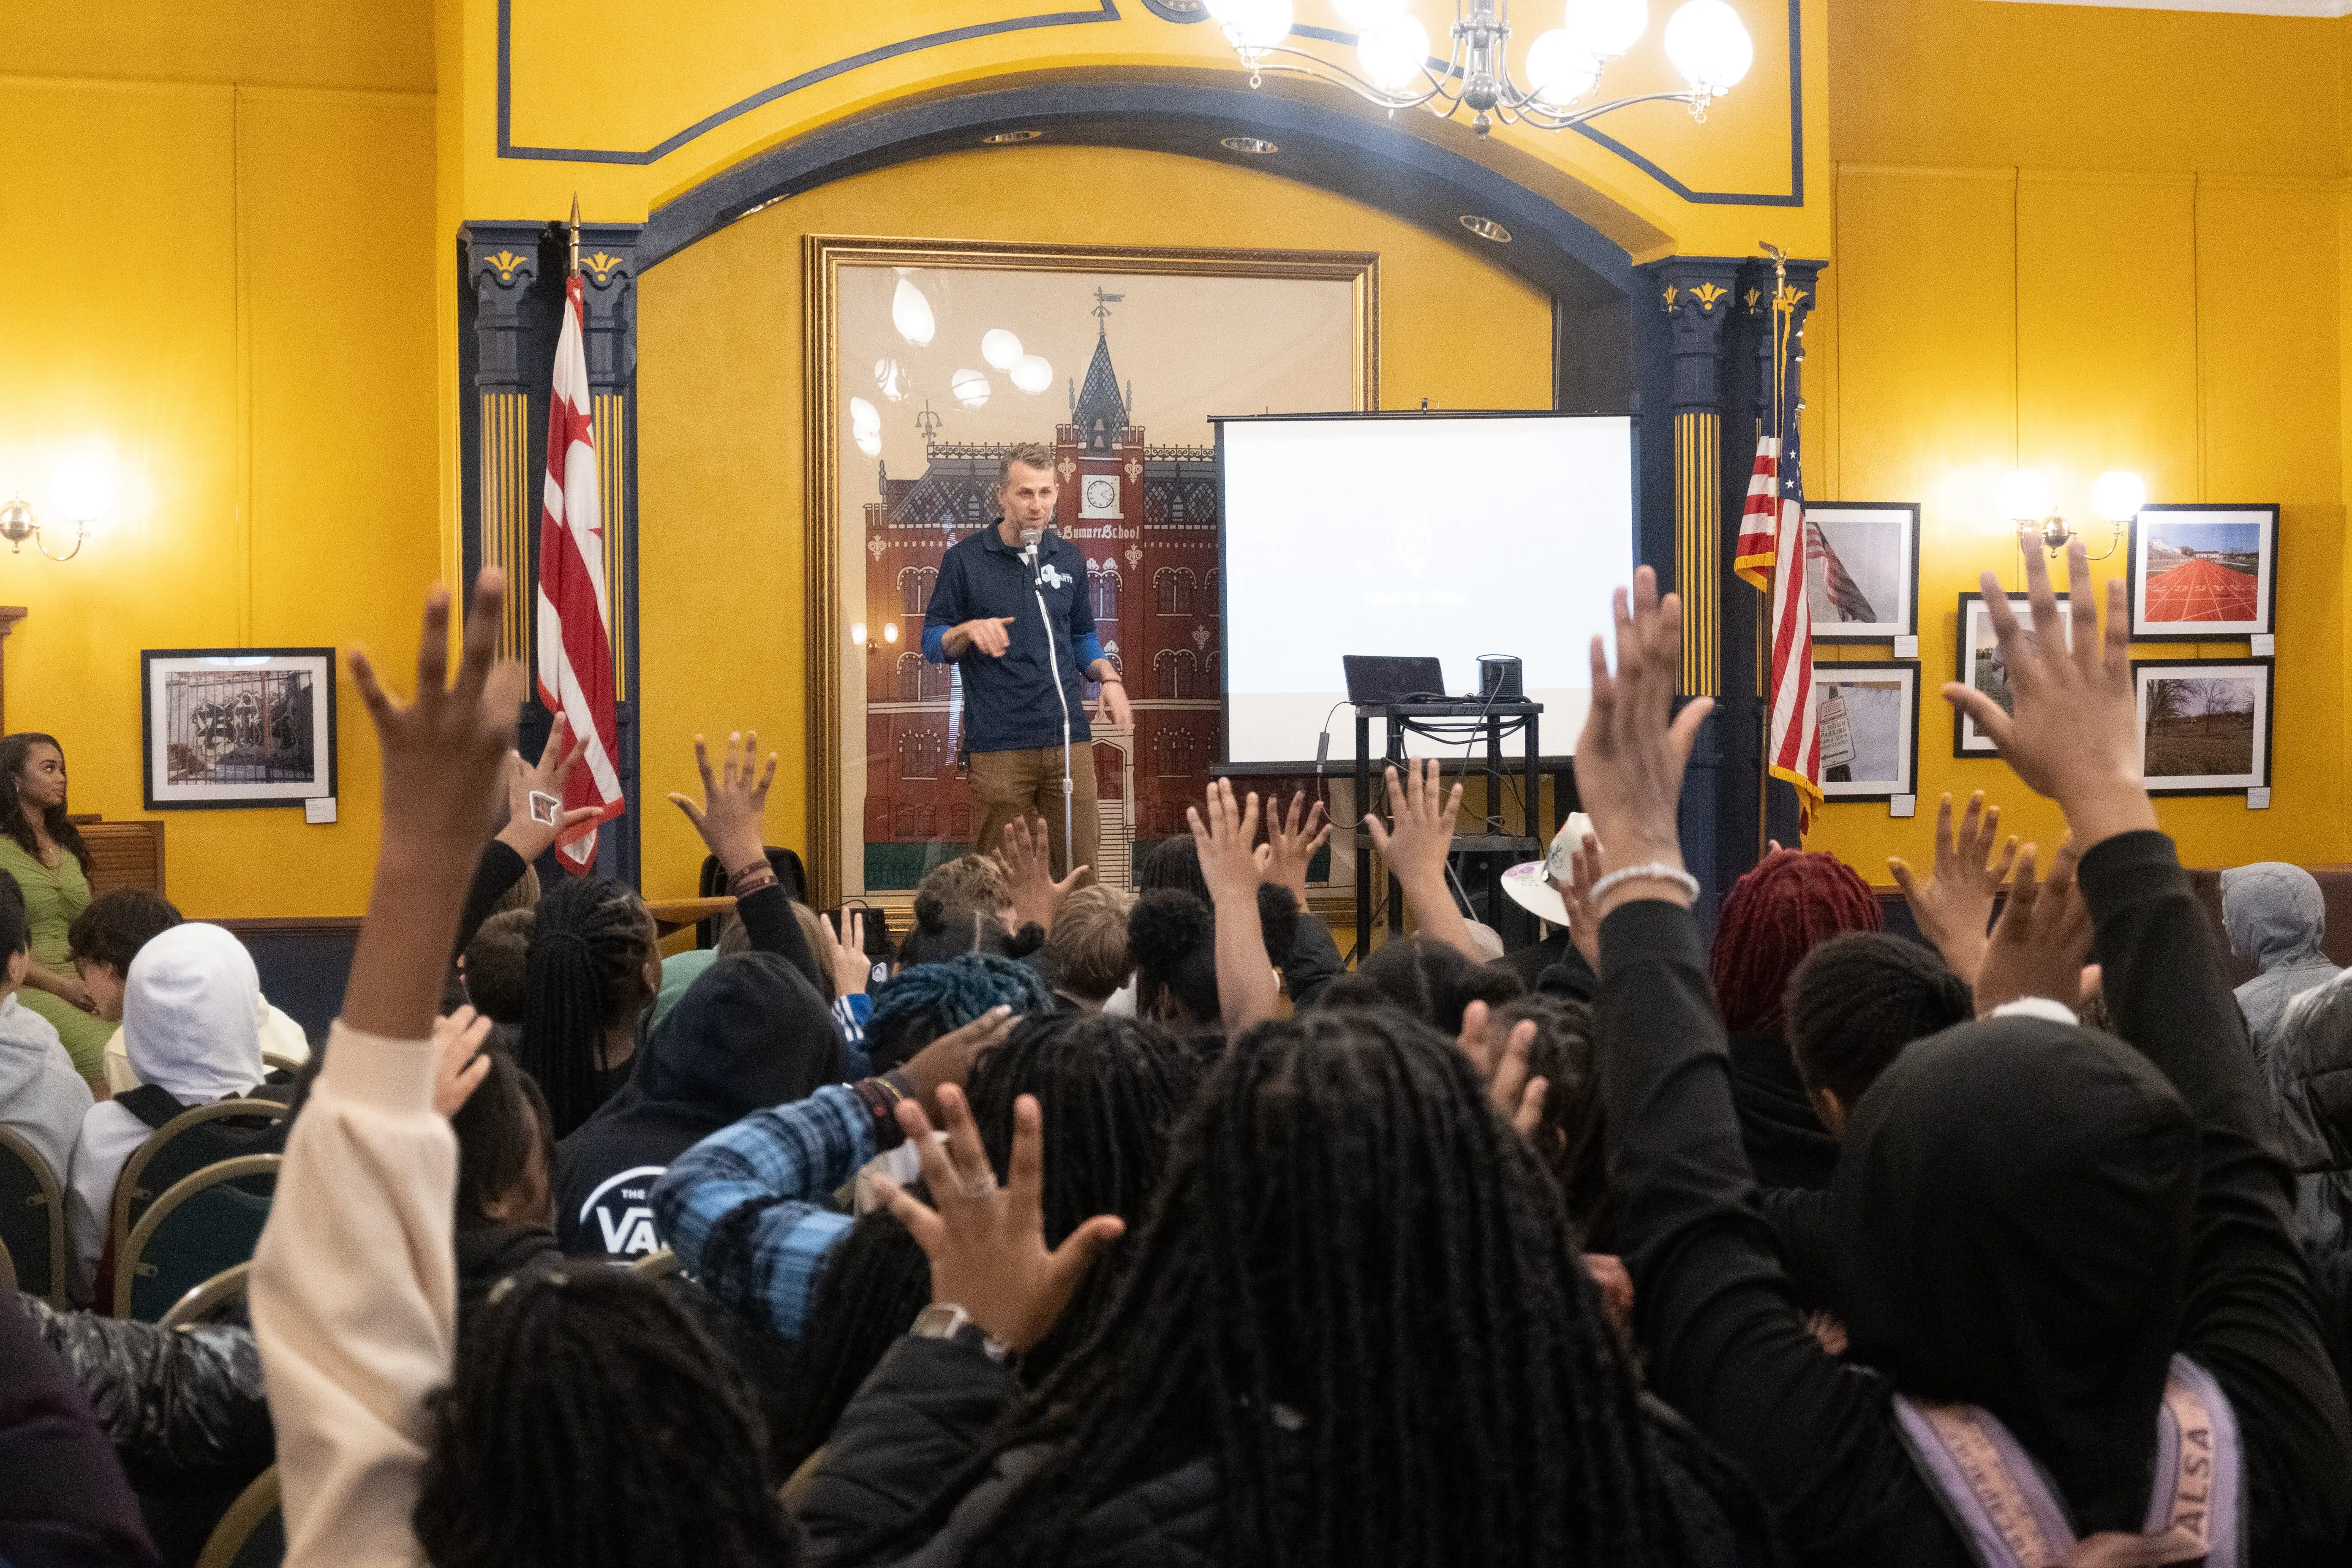 A man stands on stage at the Charles Sumner gallery holding a microphone and the audience of students raise their hands